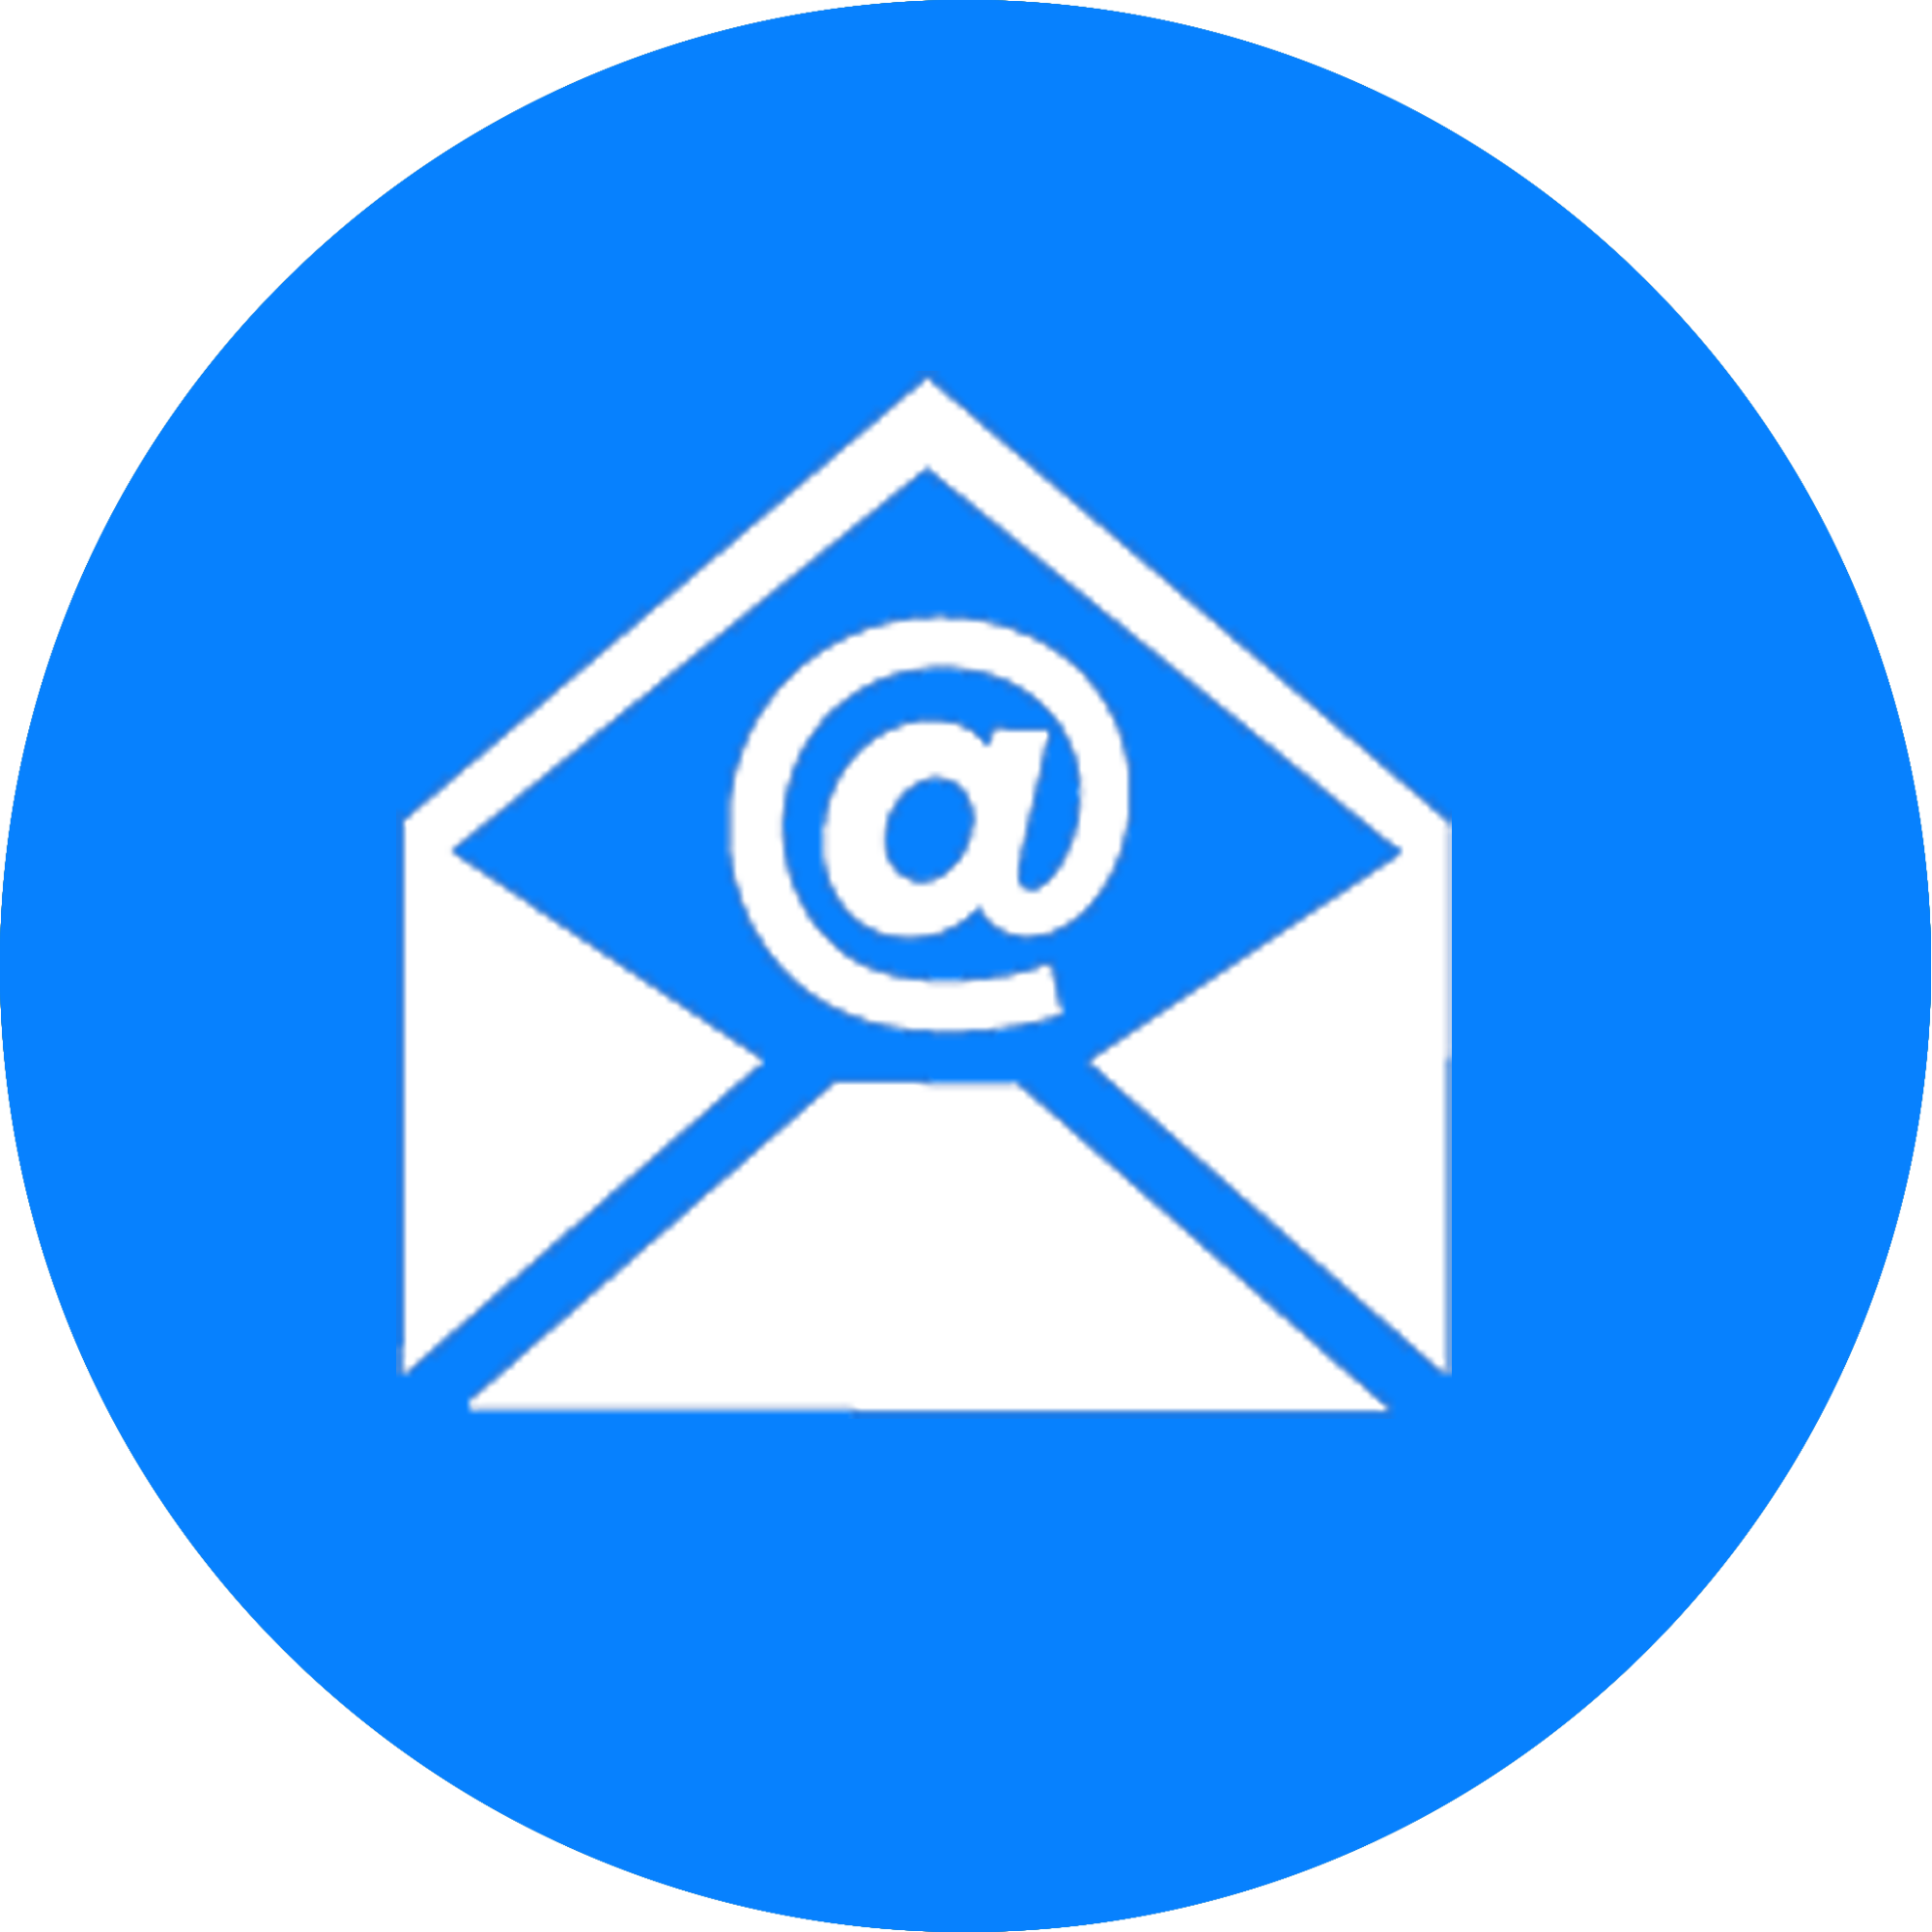 Email Logo PNG Picture